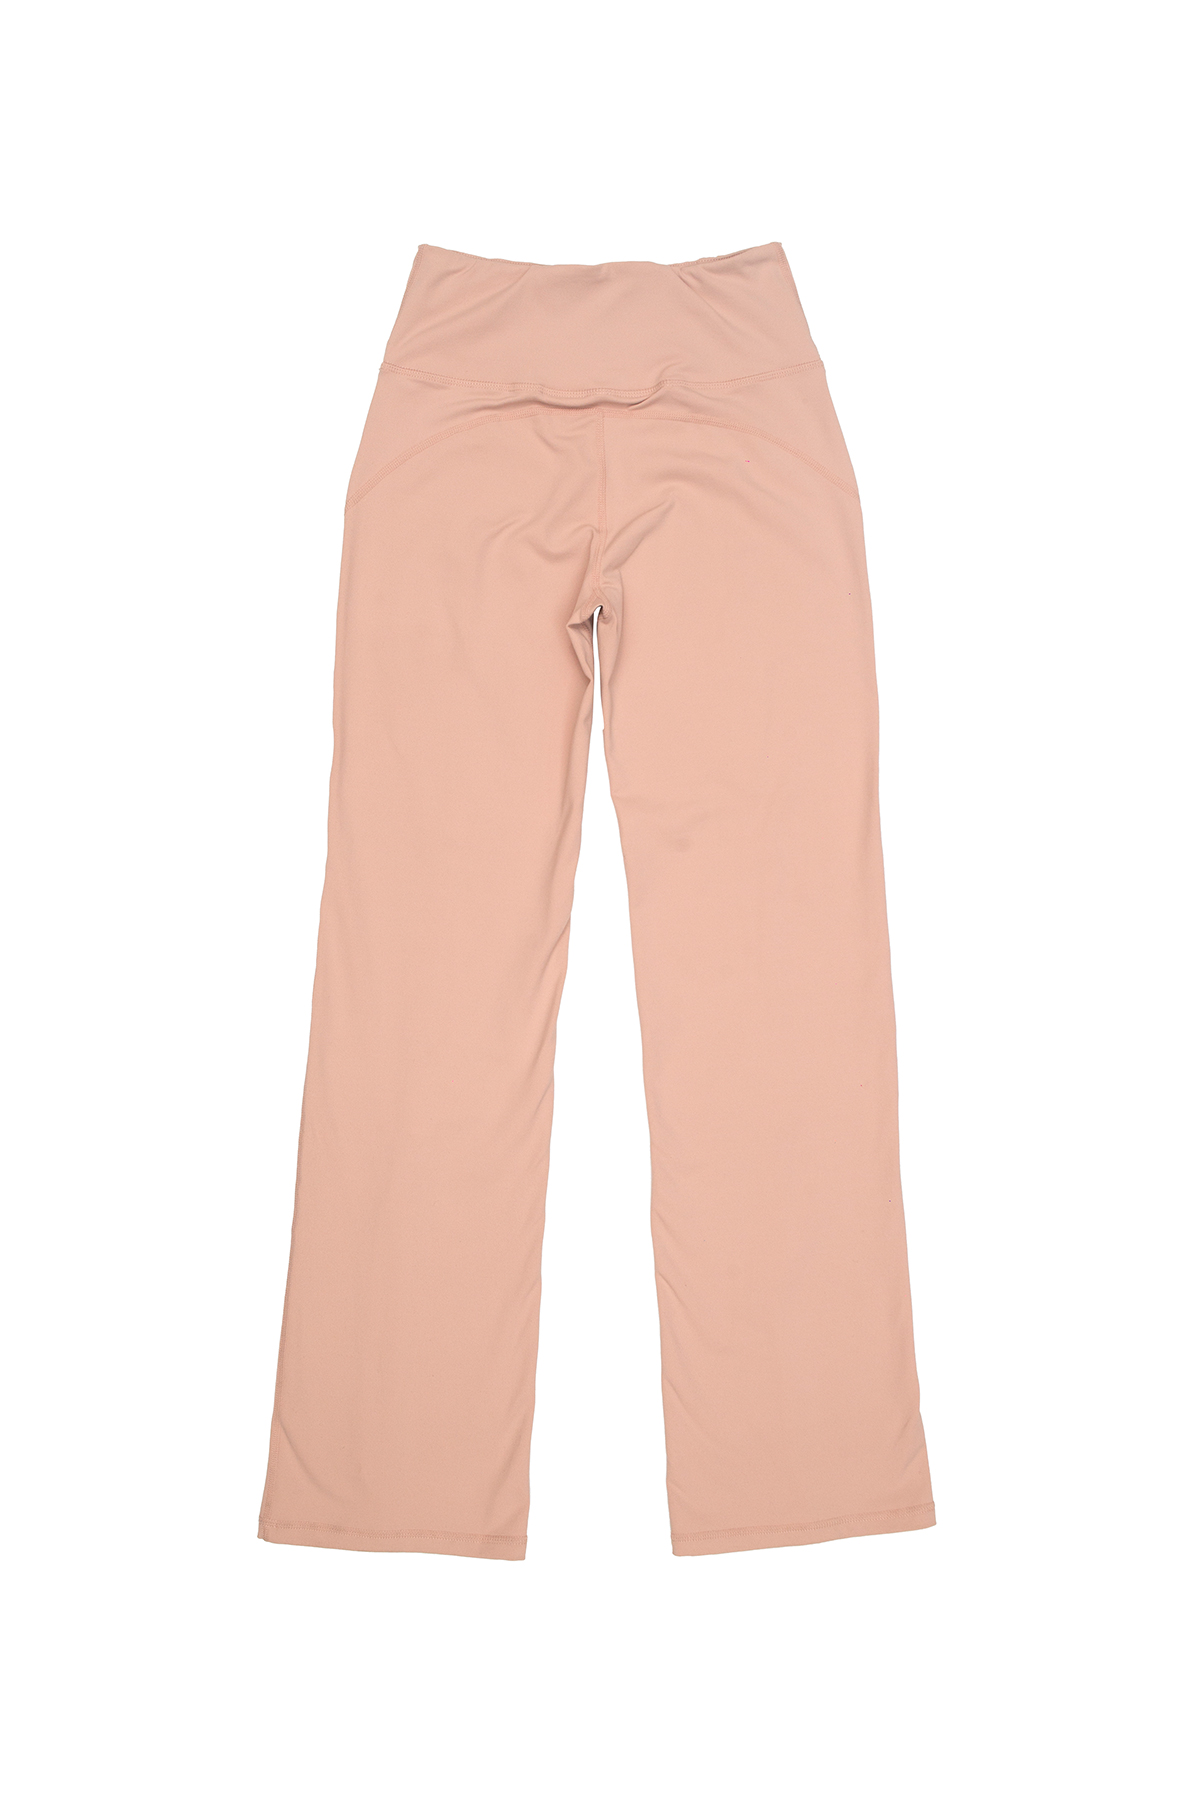 Time-Out-X-Flare-Yoga-Ankle-Slit-Pants—Light-Peach—Back